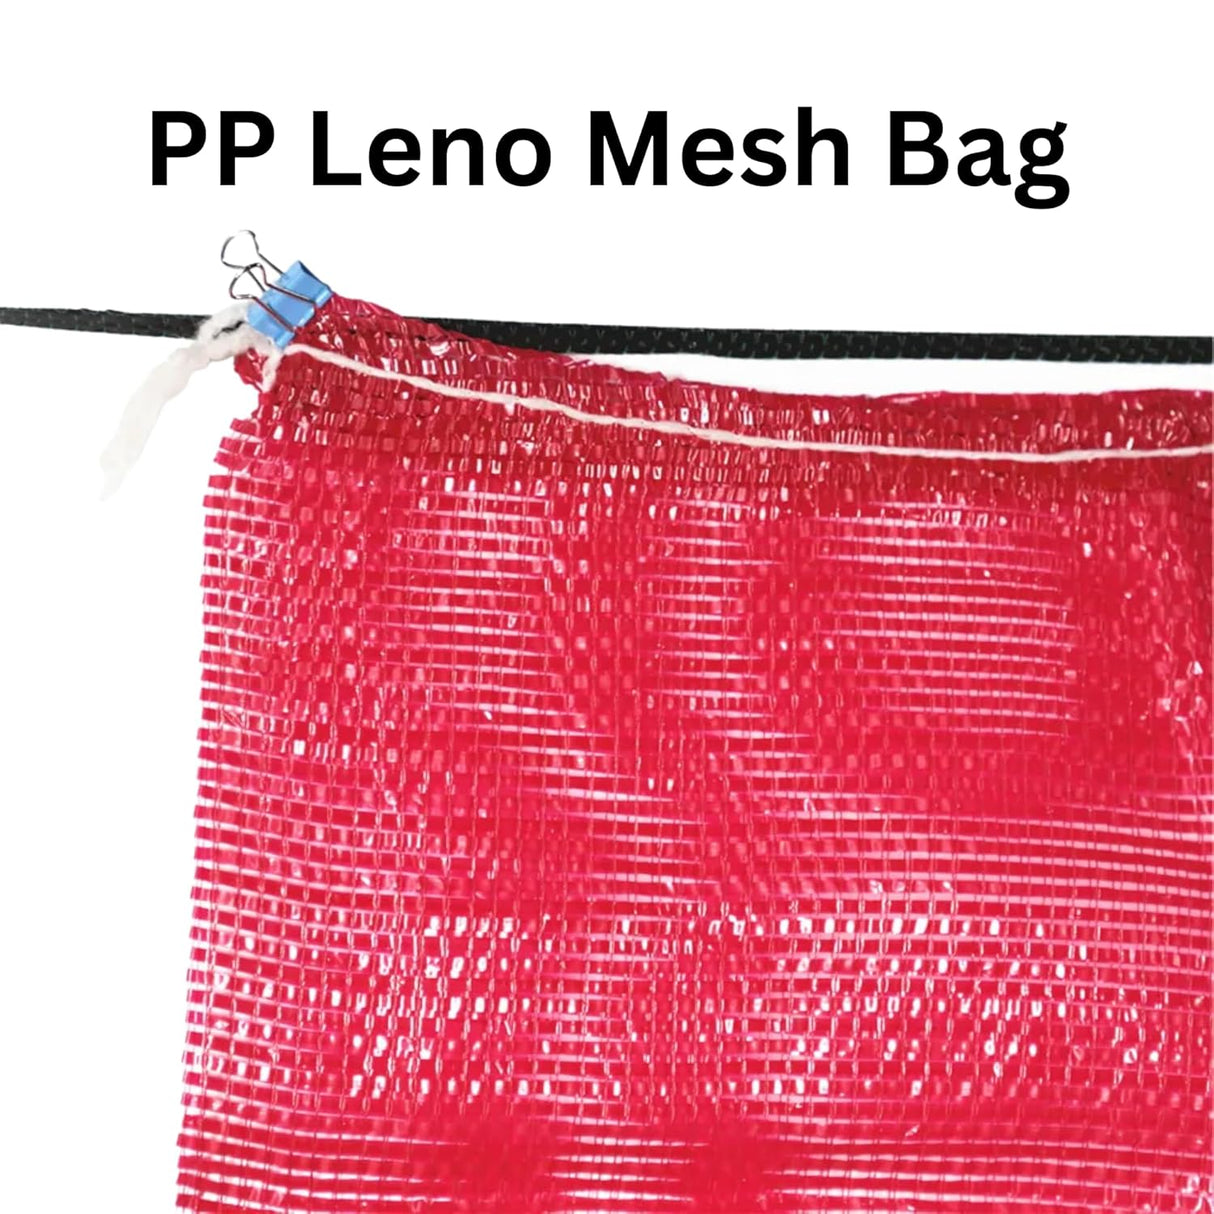 SINGHAL Leno Mesh Storage Produce Bags Reusable for Vegetable Storage Bags Onion Storage Washable Net Bags (14x24 Inch - Yellow, 10)